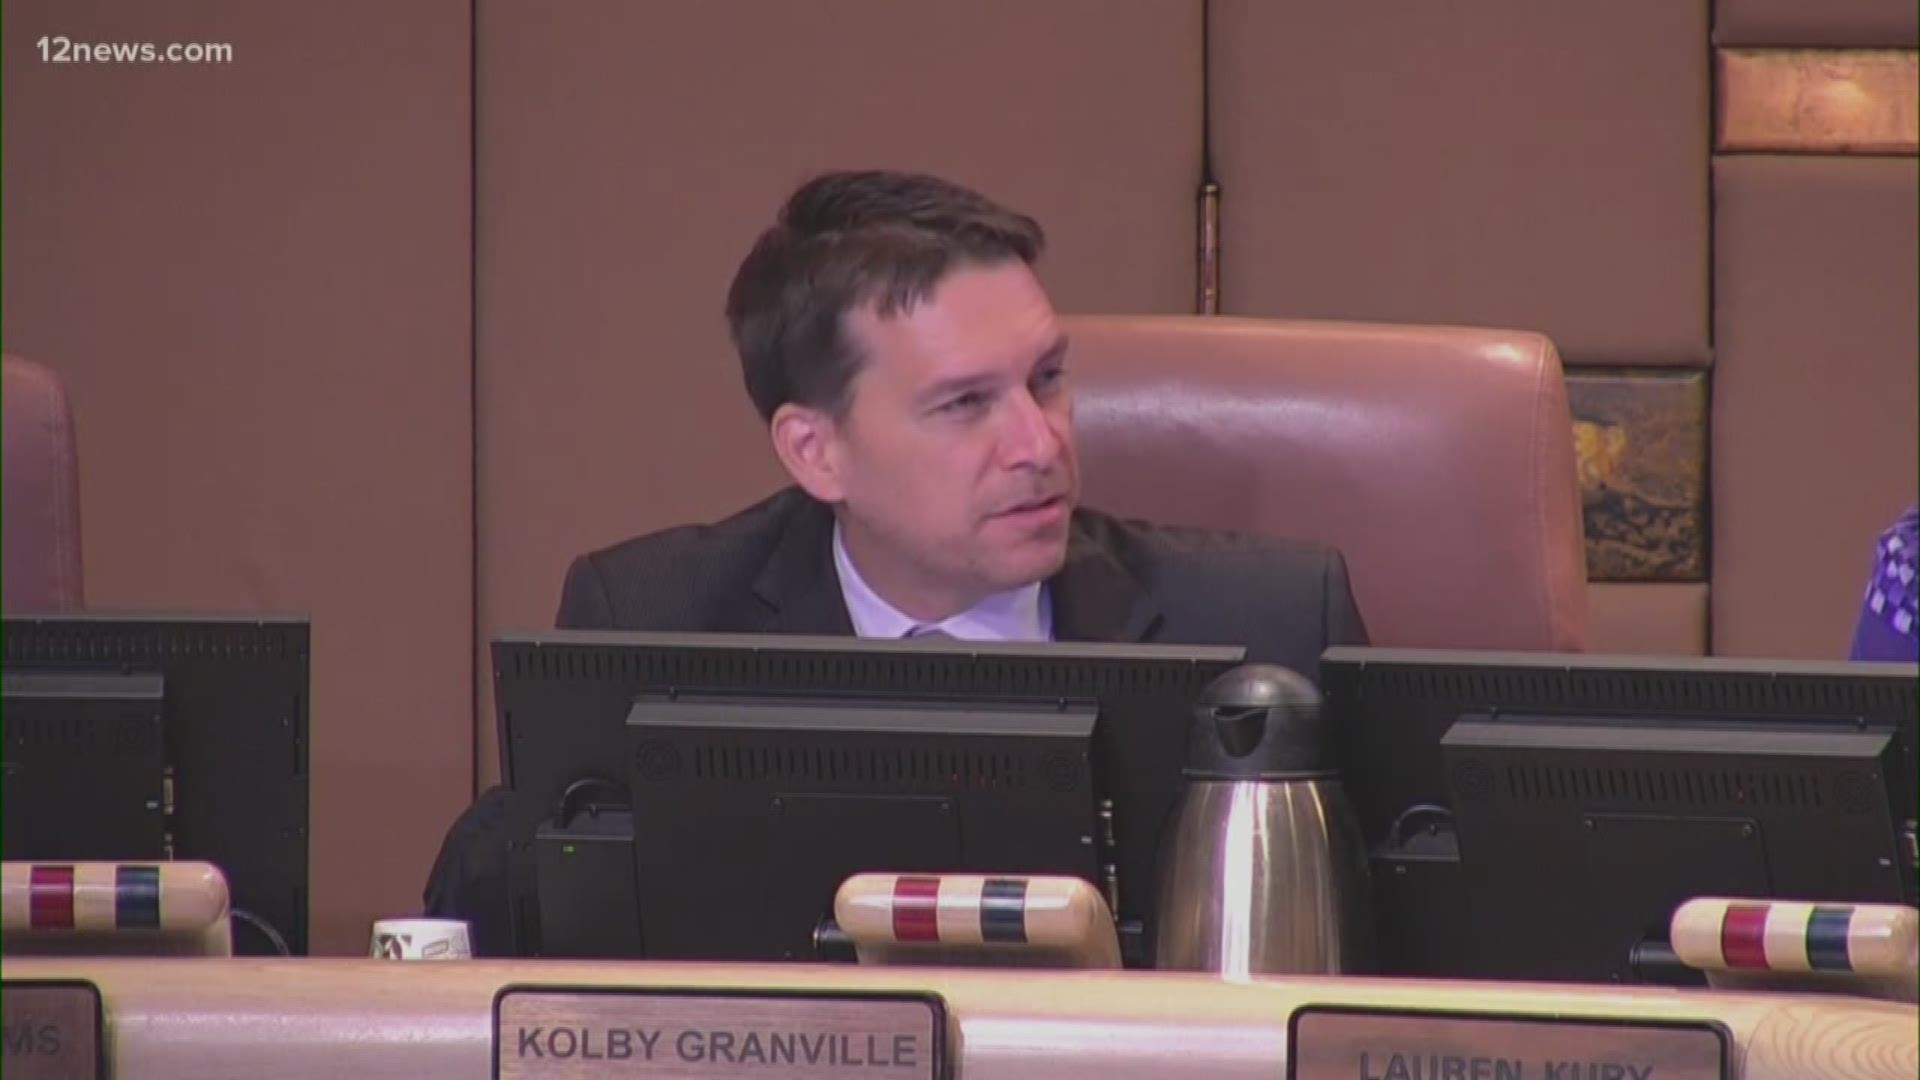 Granville was fired as a history teacher in December 2017 from Tempe Preparatory Academy after allegations of providing alcohol to minors and unwanted sexual advanced toward women.